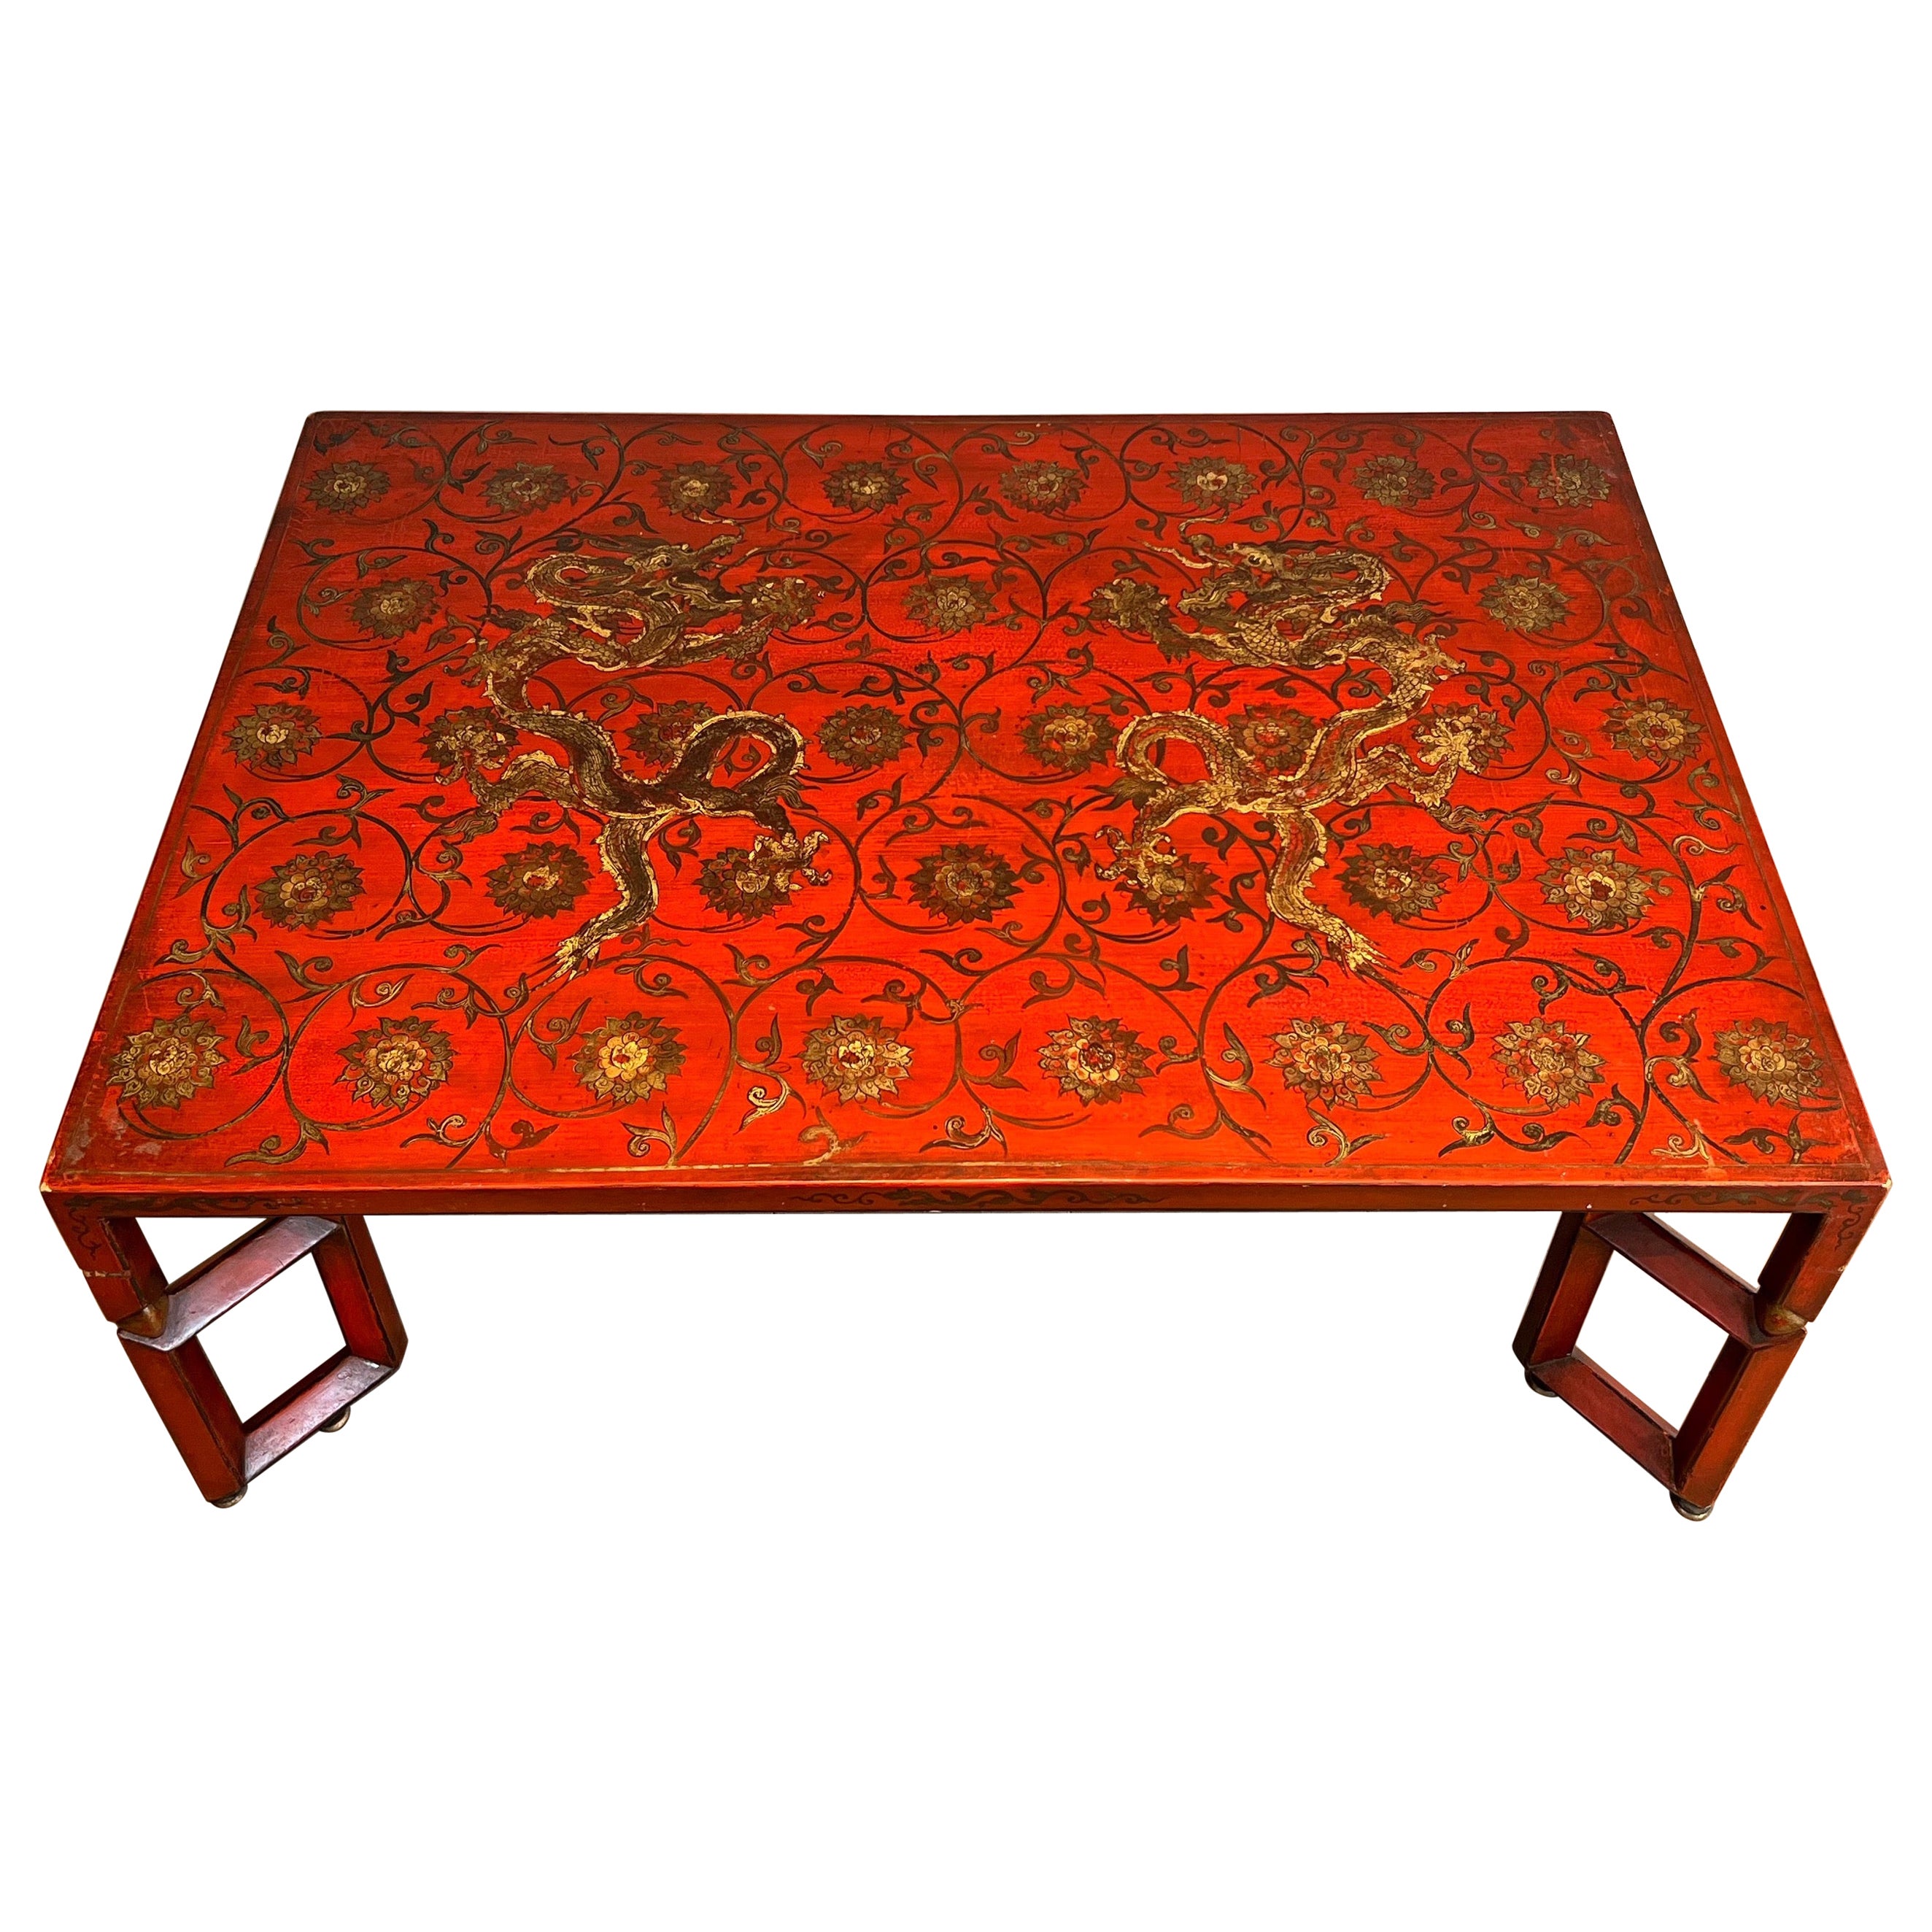 Large Red Lacquered Coffee Table with Gold Chinese Decorations For Sale